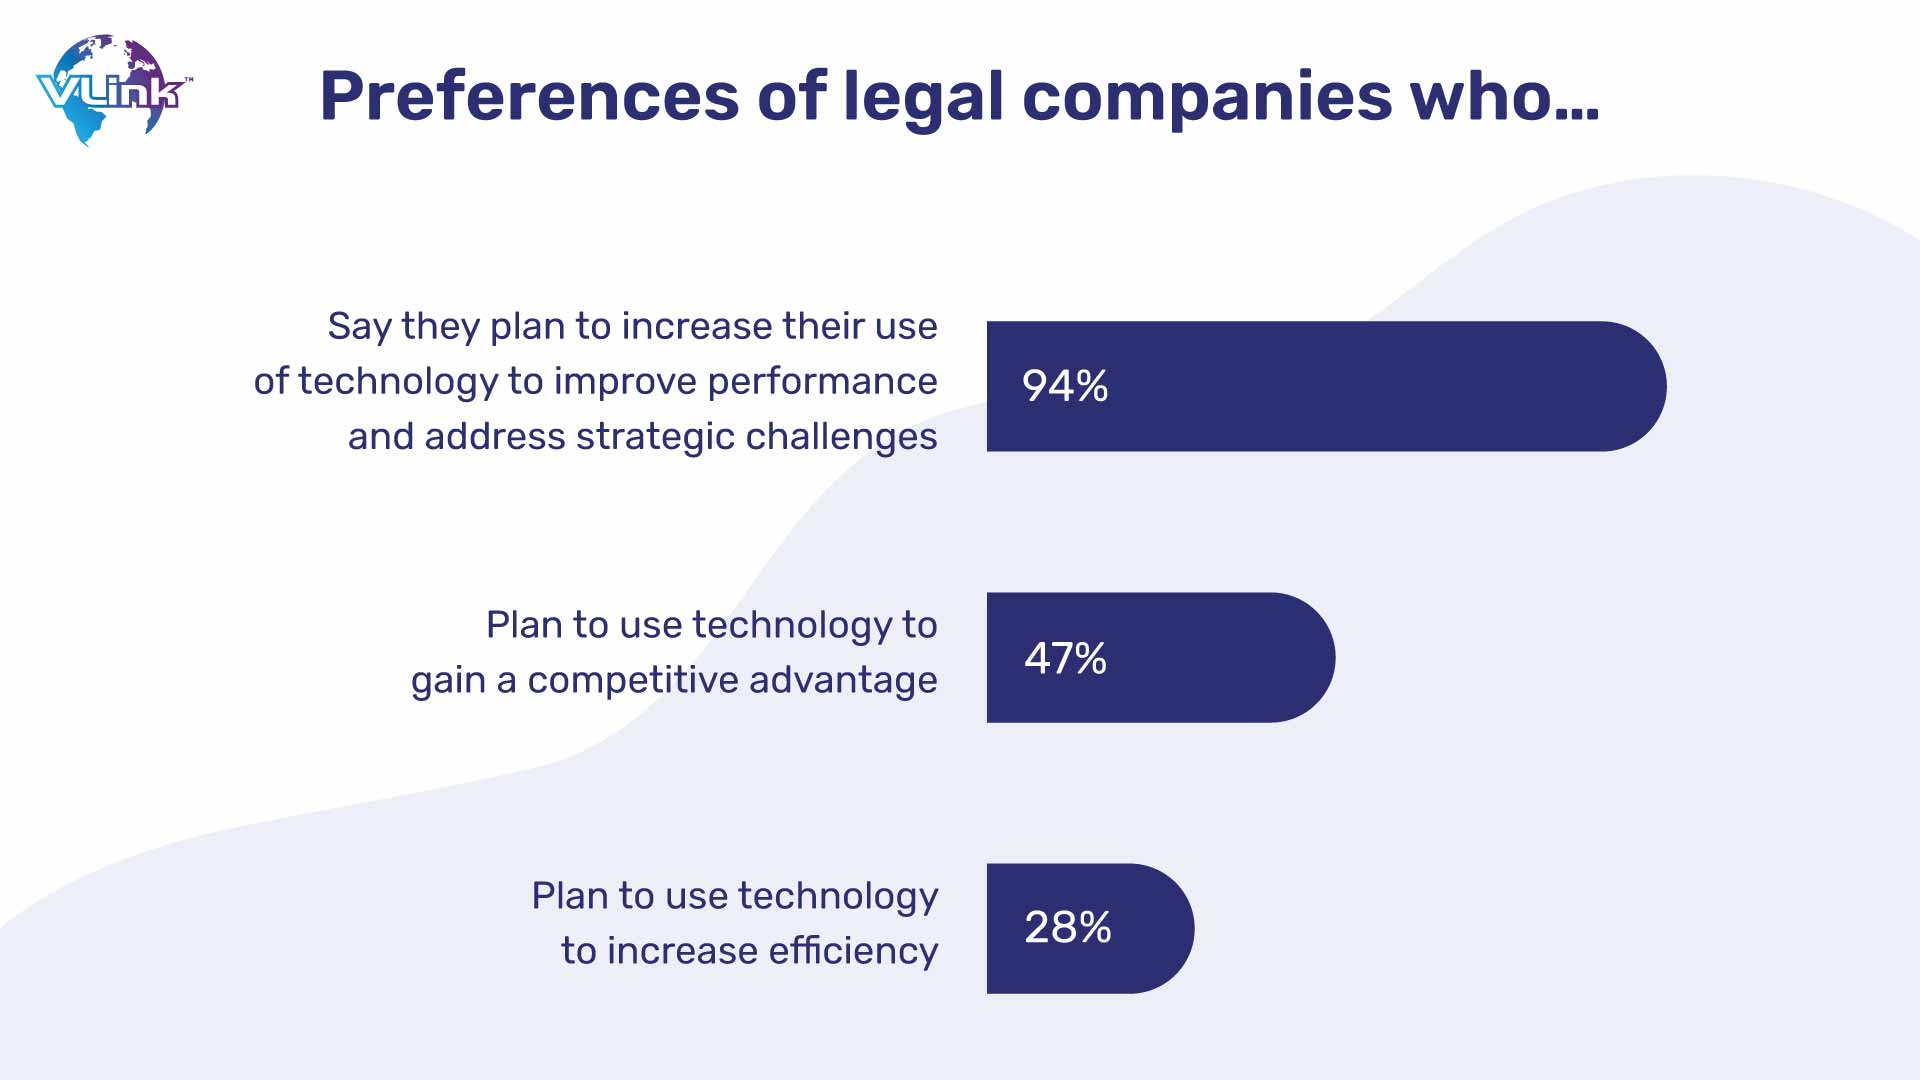 Preference of legal companies